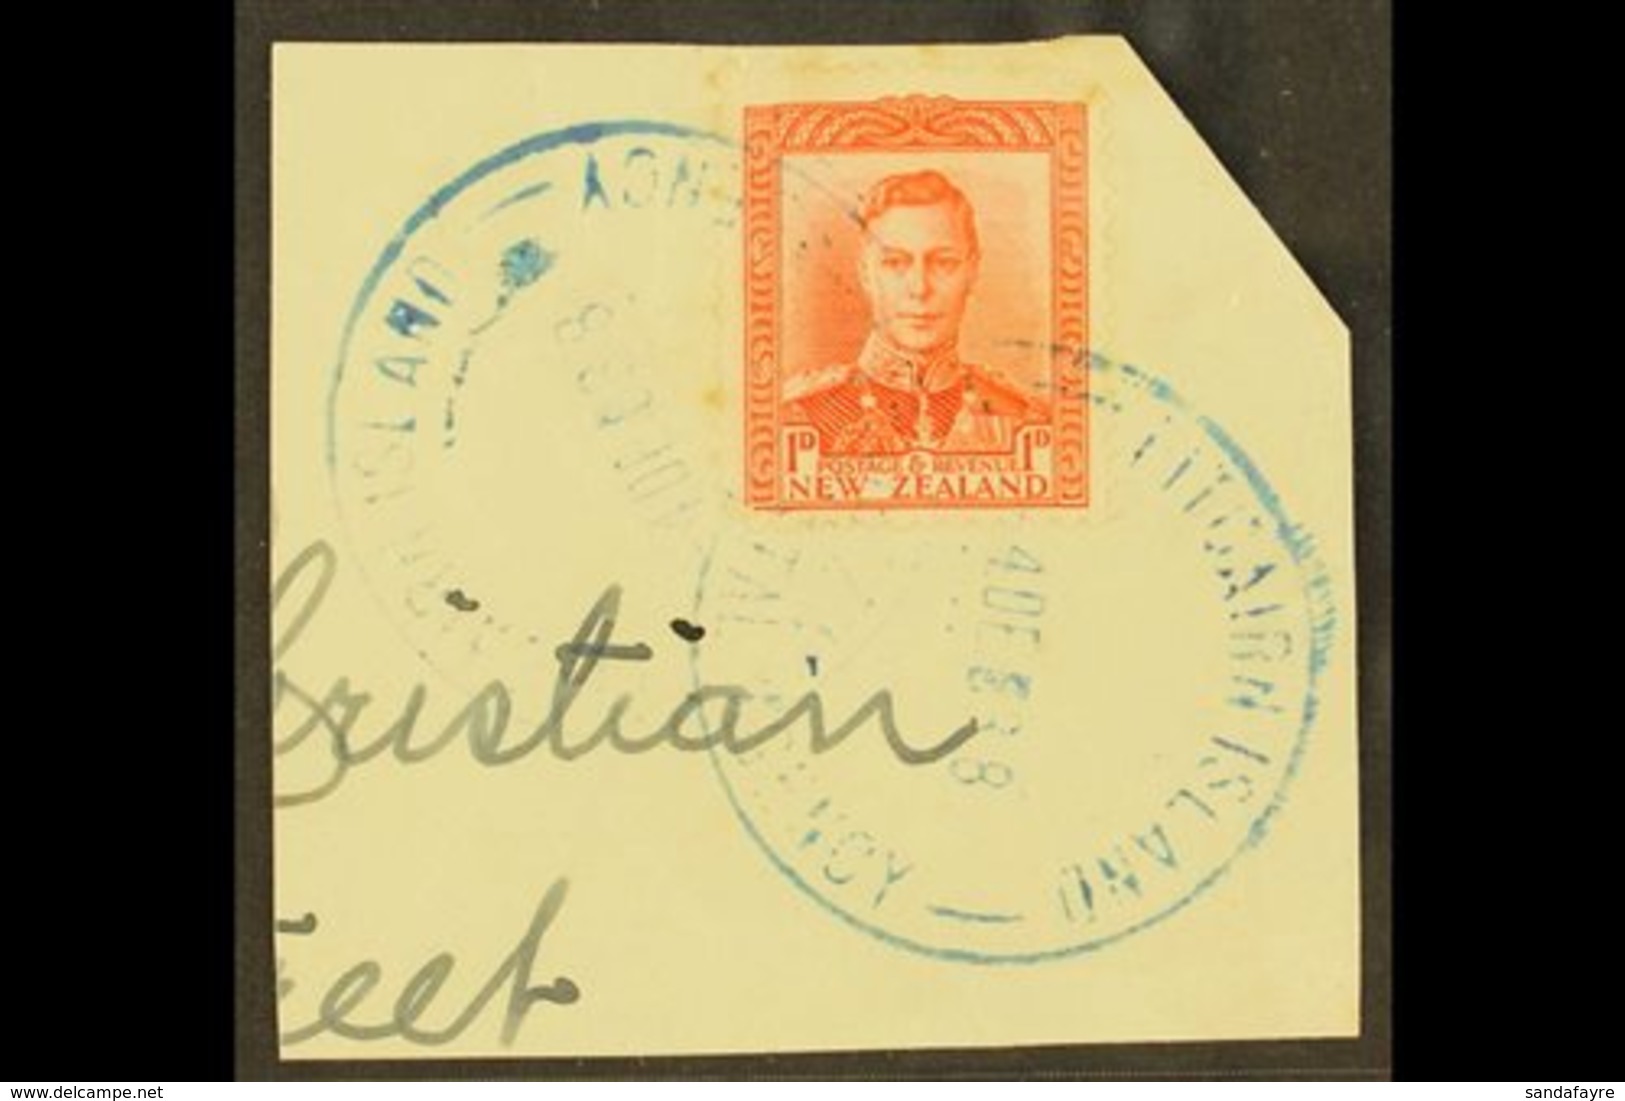 1938 1d Scarlet KGVI Of New Zealand, On Piece Tied By Fine Full "PITCAIRN ISLAND" Cds Cancels Of 4 DE 38, SG Z59. For Mo - Pitcairn